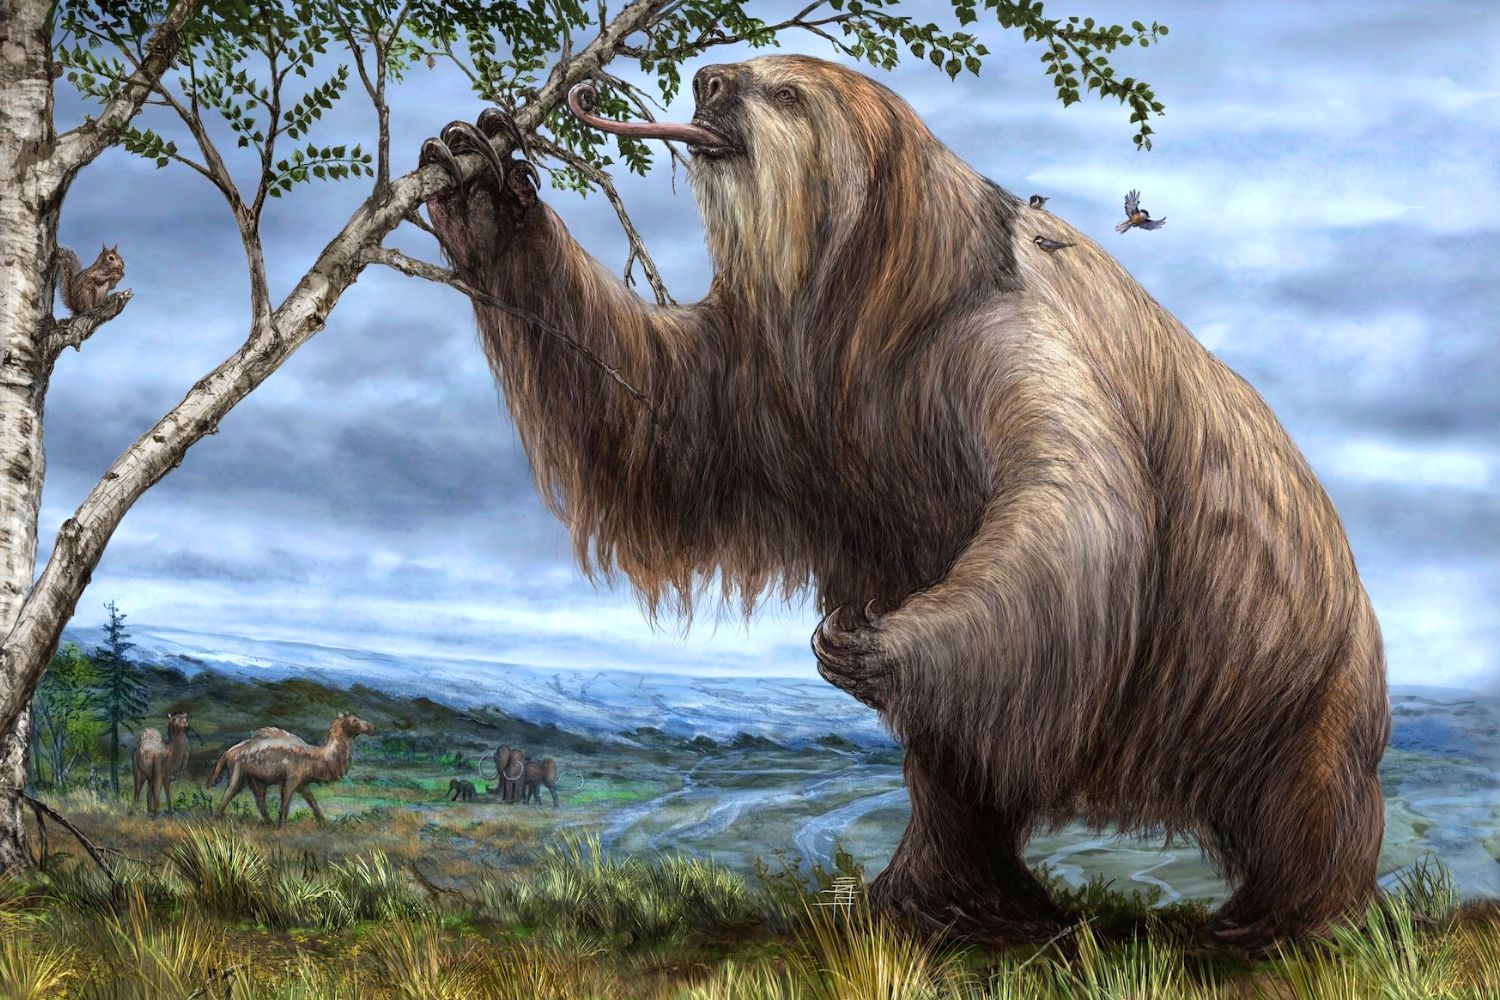 4. There used to be “mega sloths” roaming the Earth.